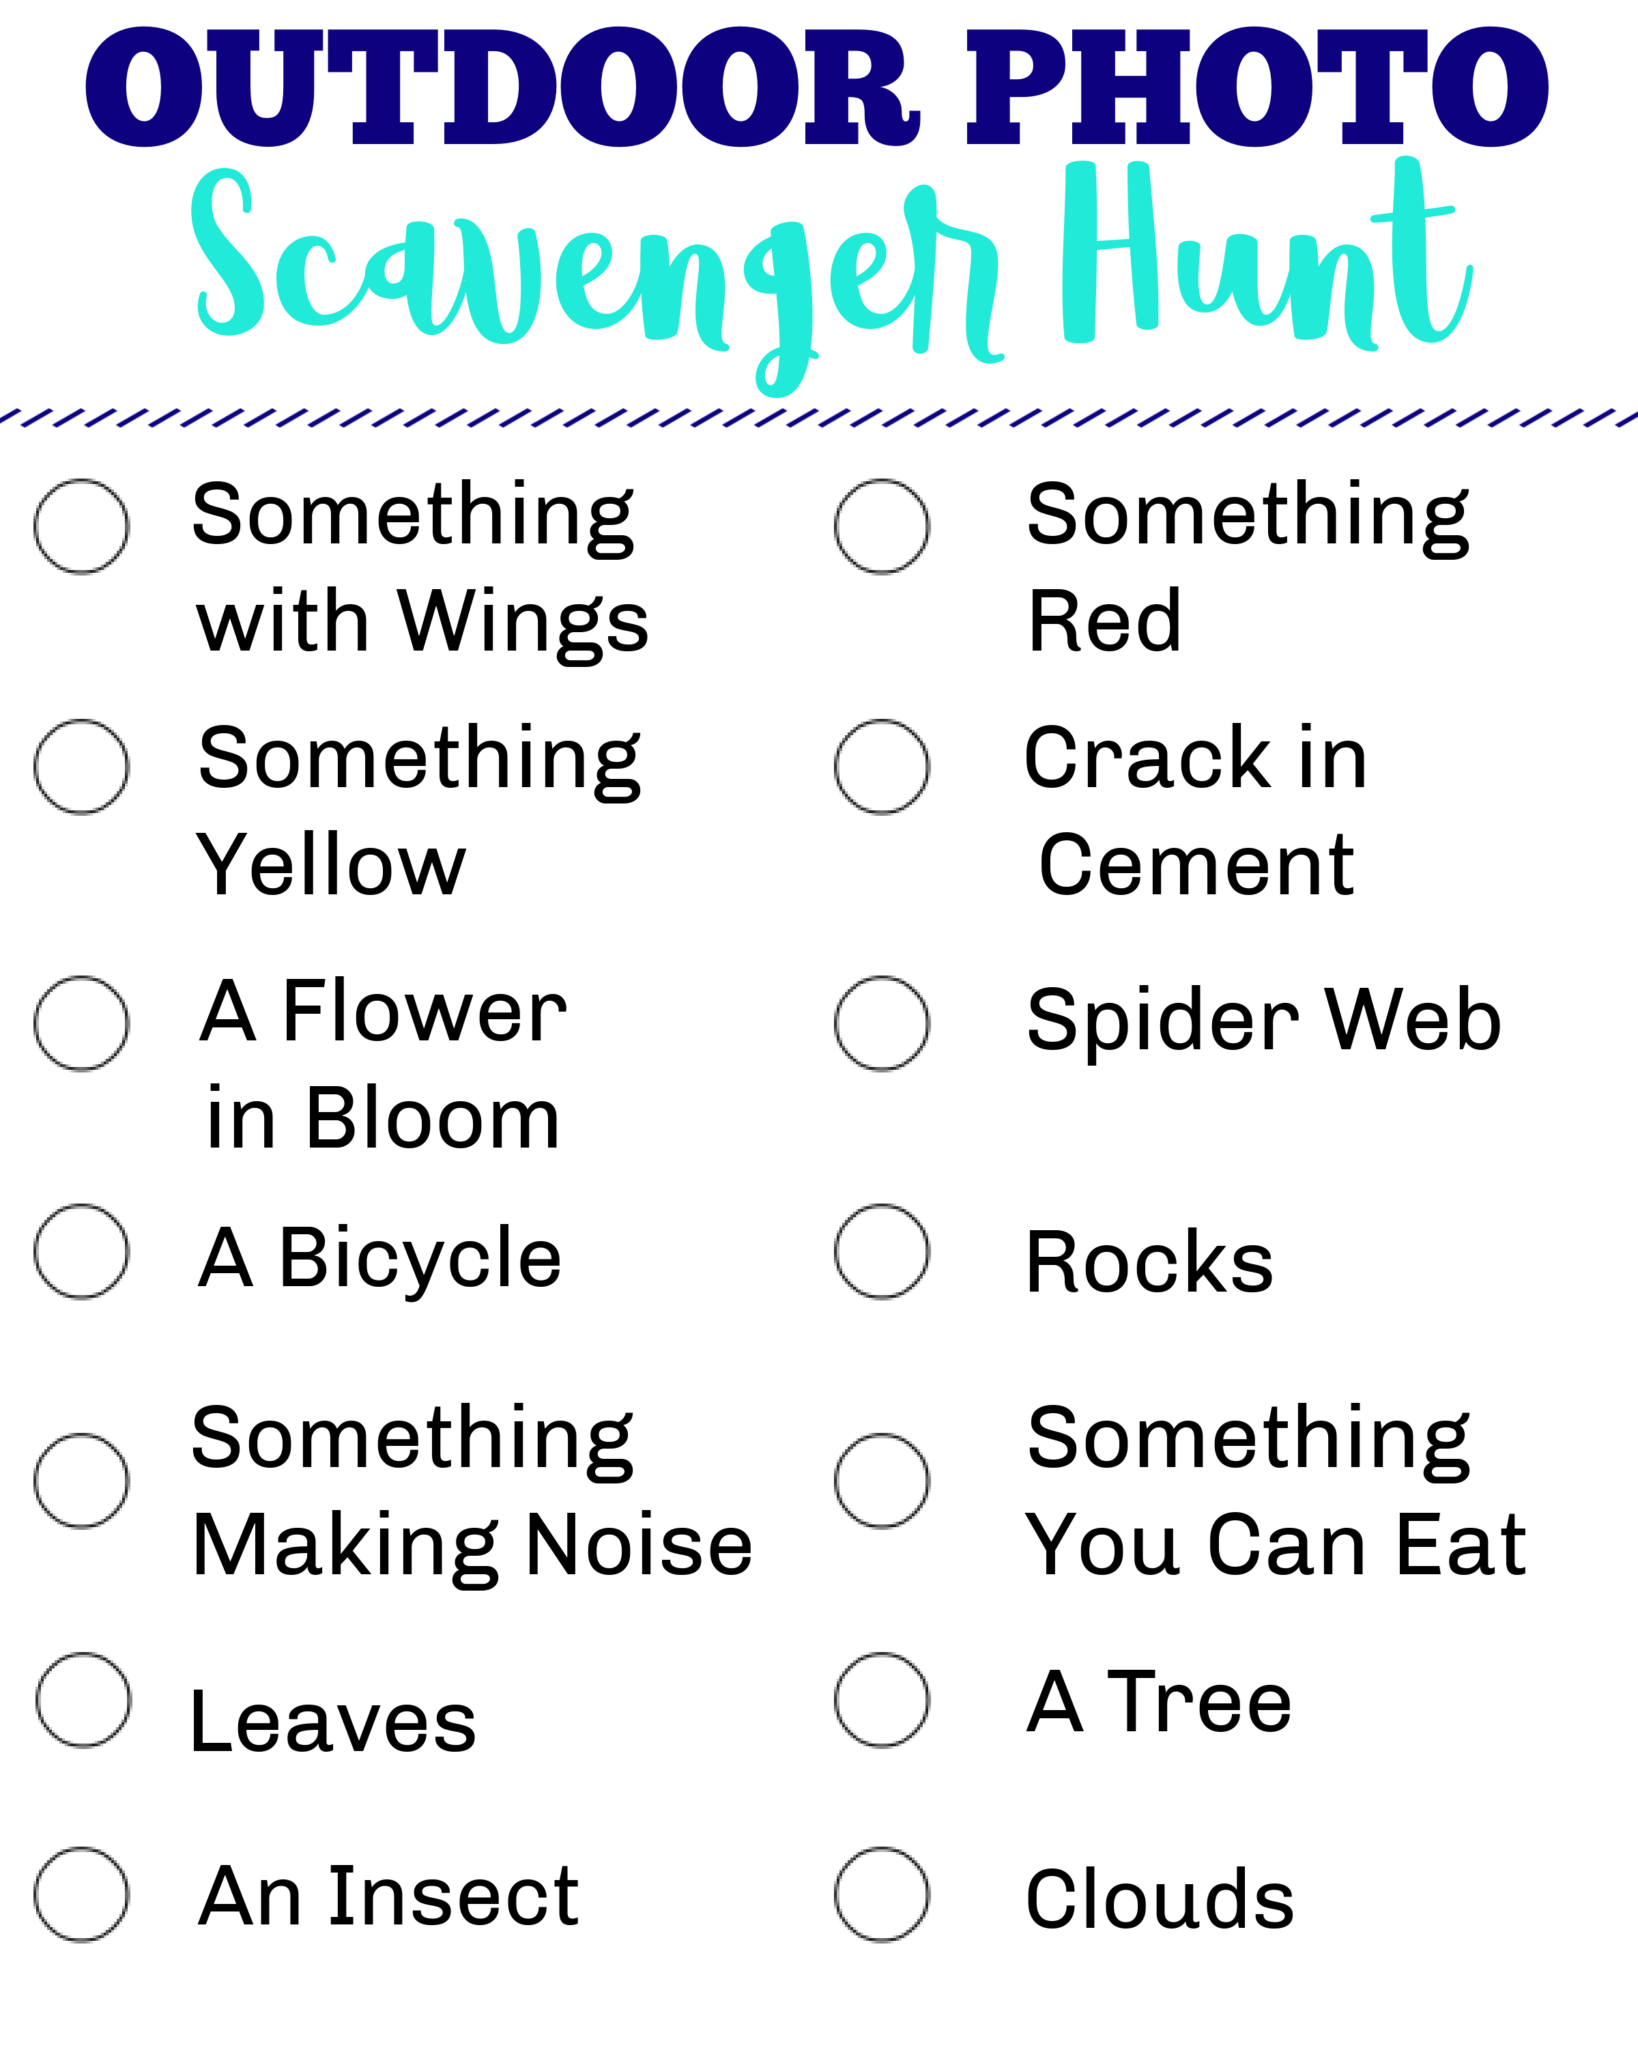 outdoor photo scavenger hunt for kids printable clues